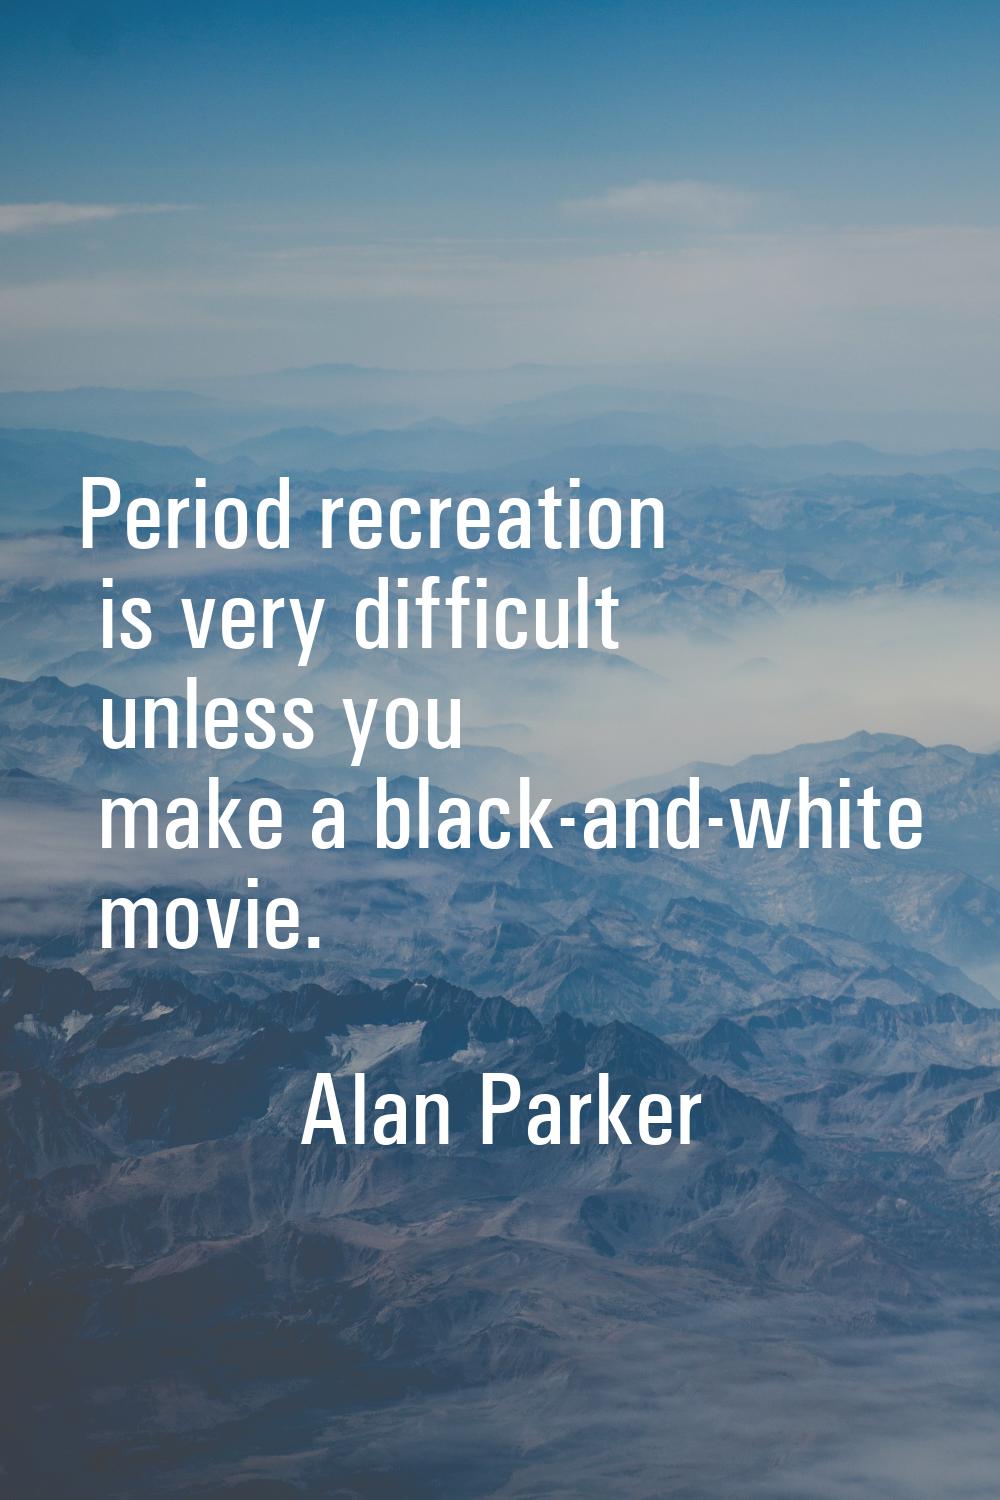 Period recreation is very difficult unless you make a black-and-white movie.